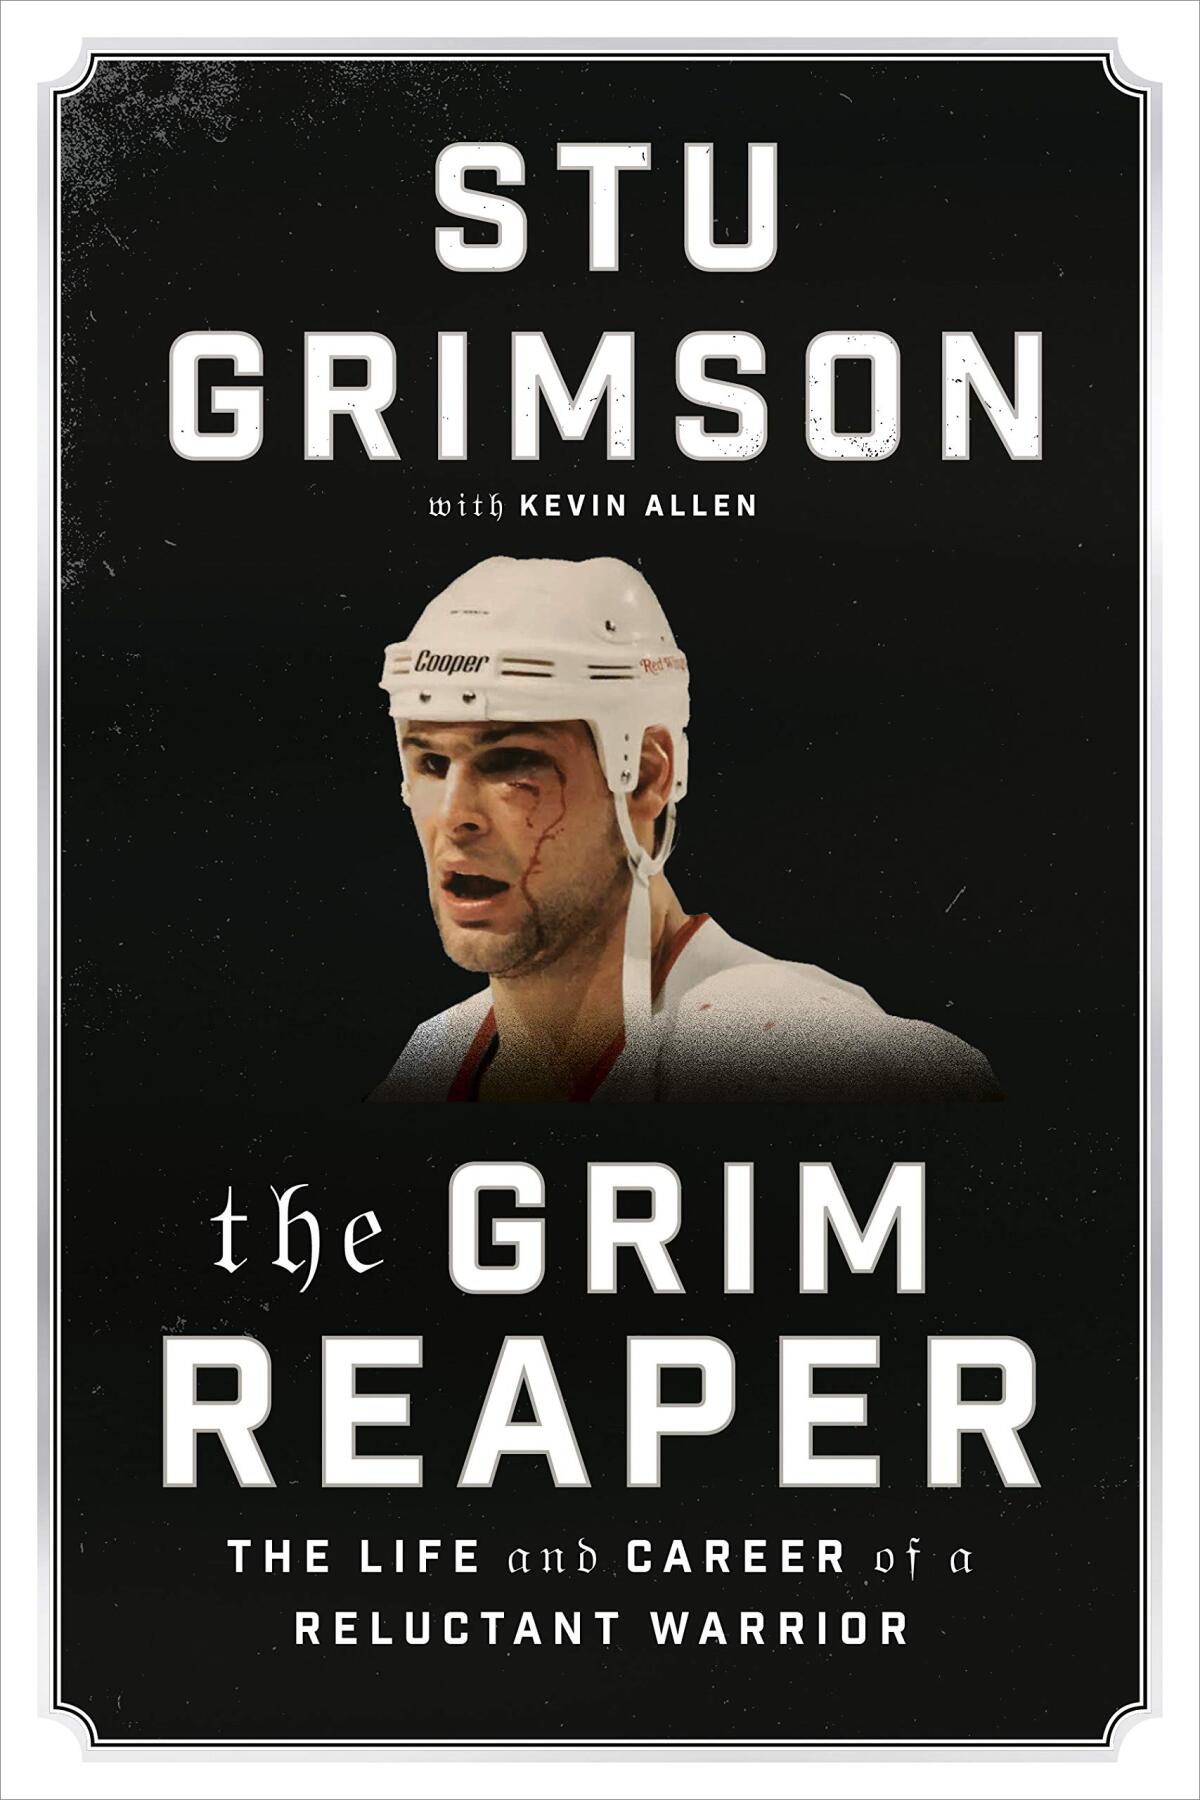 Front cover art of "The Grim Reaper: The Life and Career of a Reluctant Warrior.”